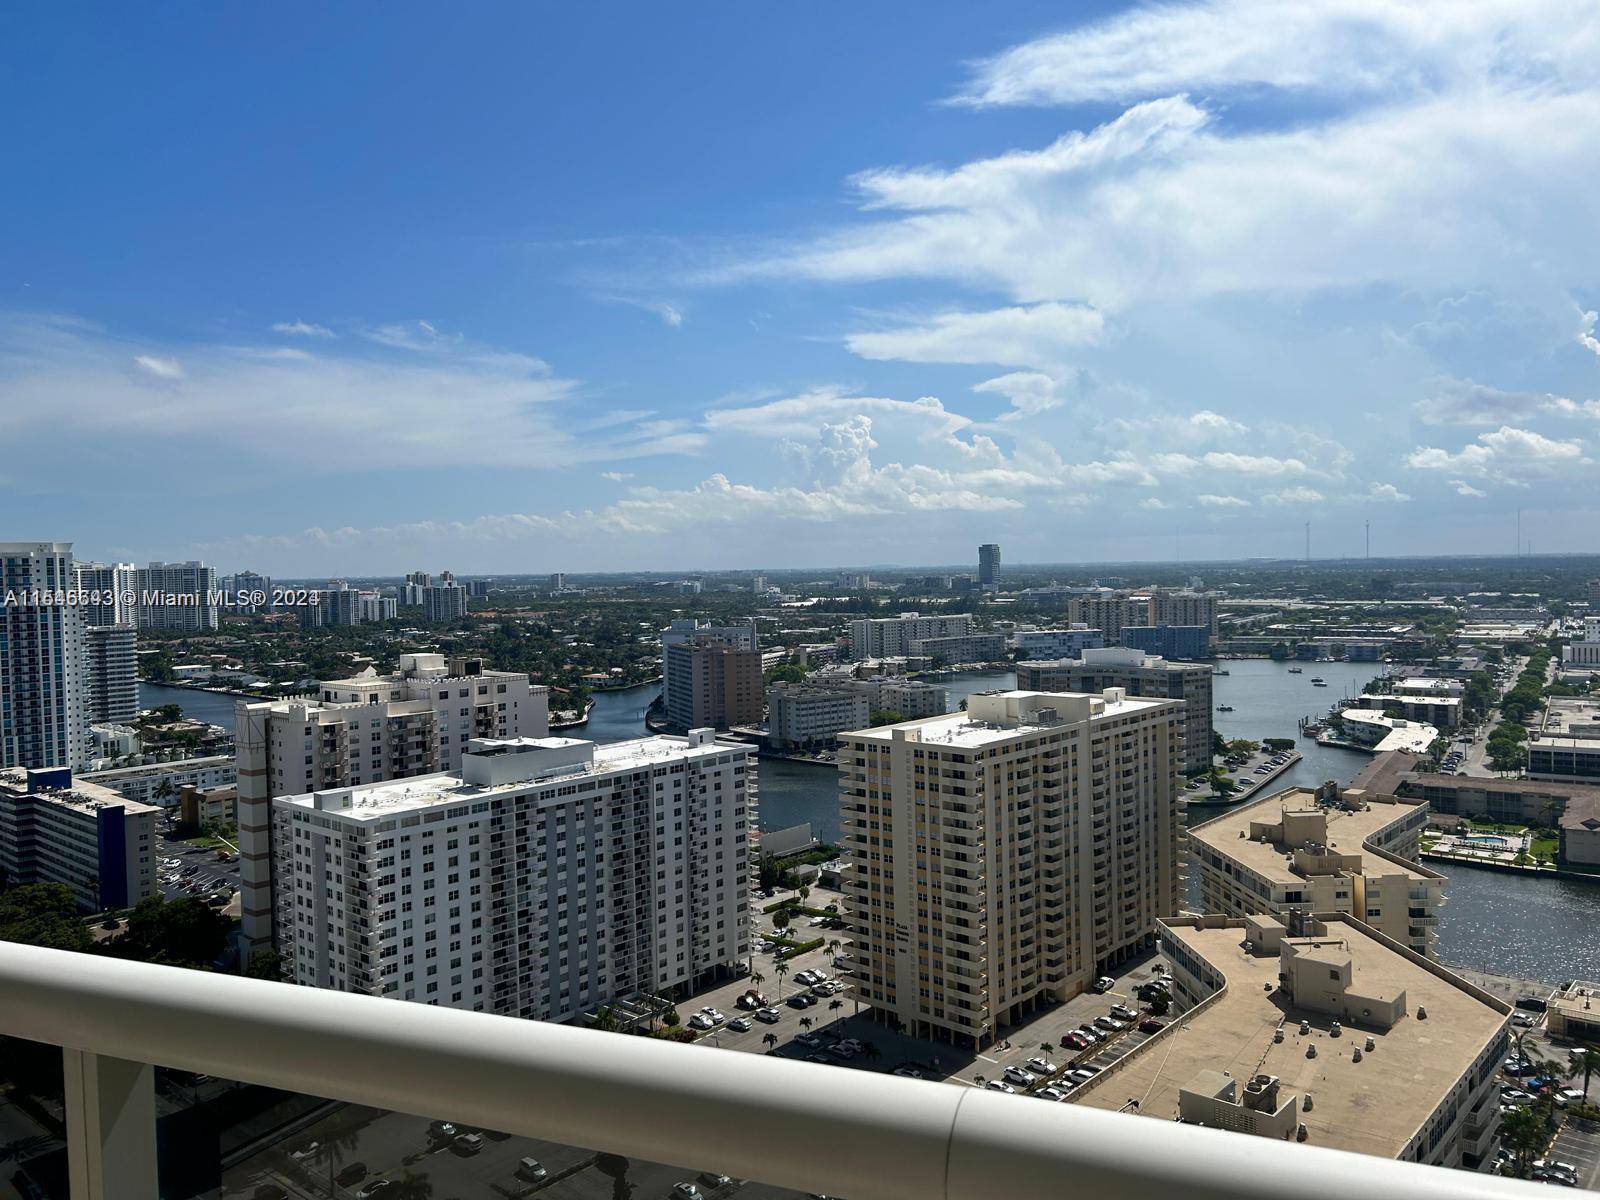 Experience the beauty of sunsets over the Intracoastal and city skyline from this contemporary furnished beachfront condo.